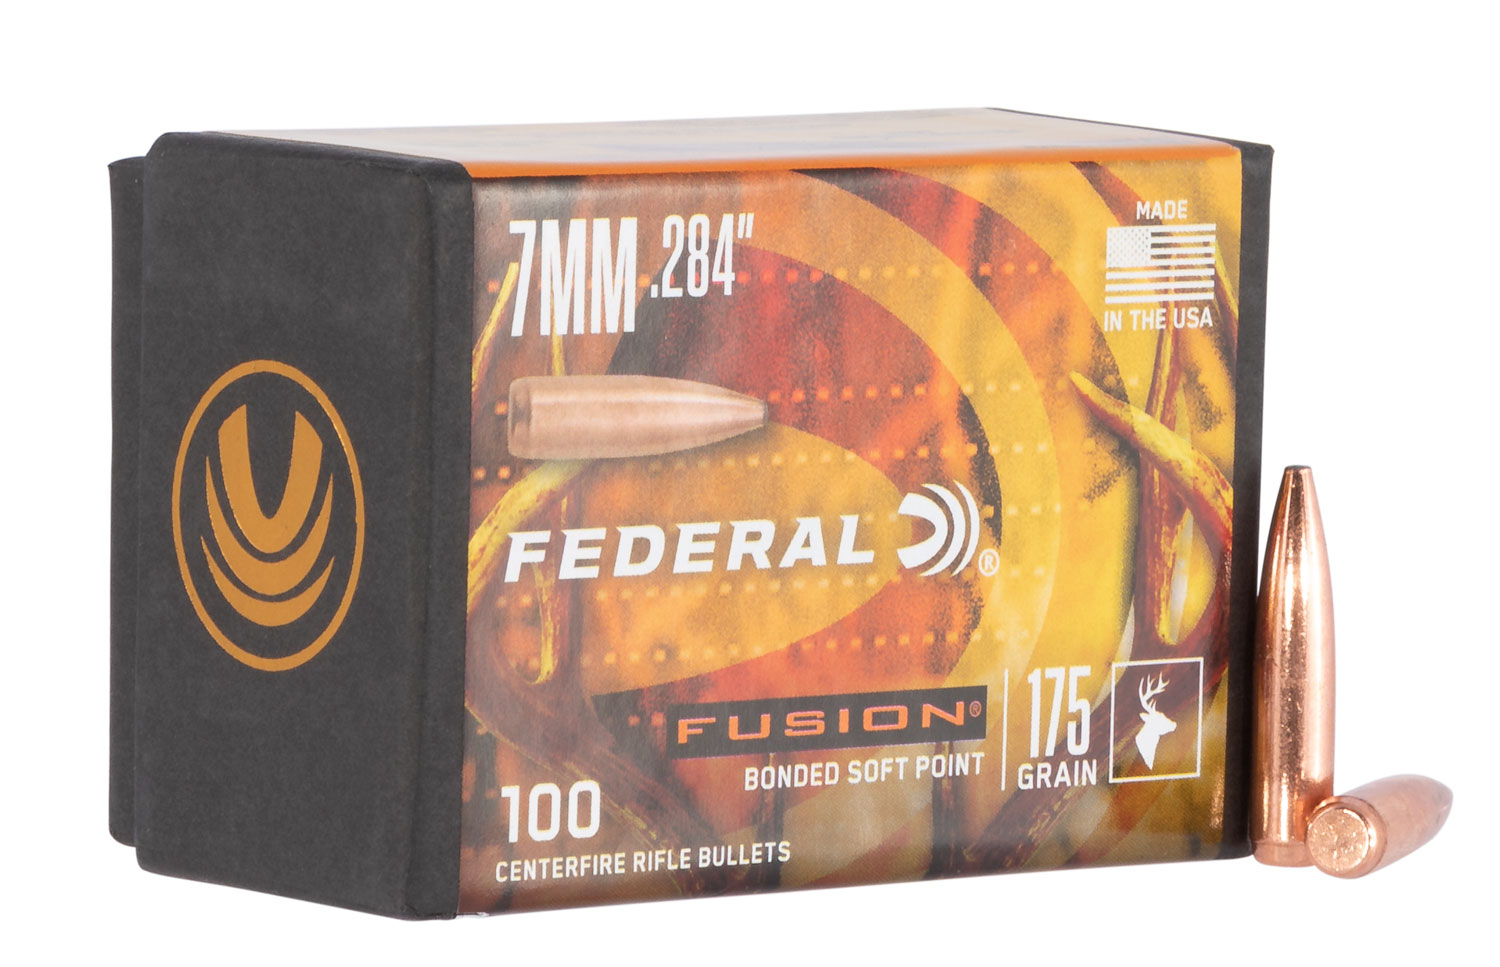 Federal FB284F4 Fusion Component  7mm .284 175 gr Fusion Soft Point